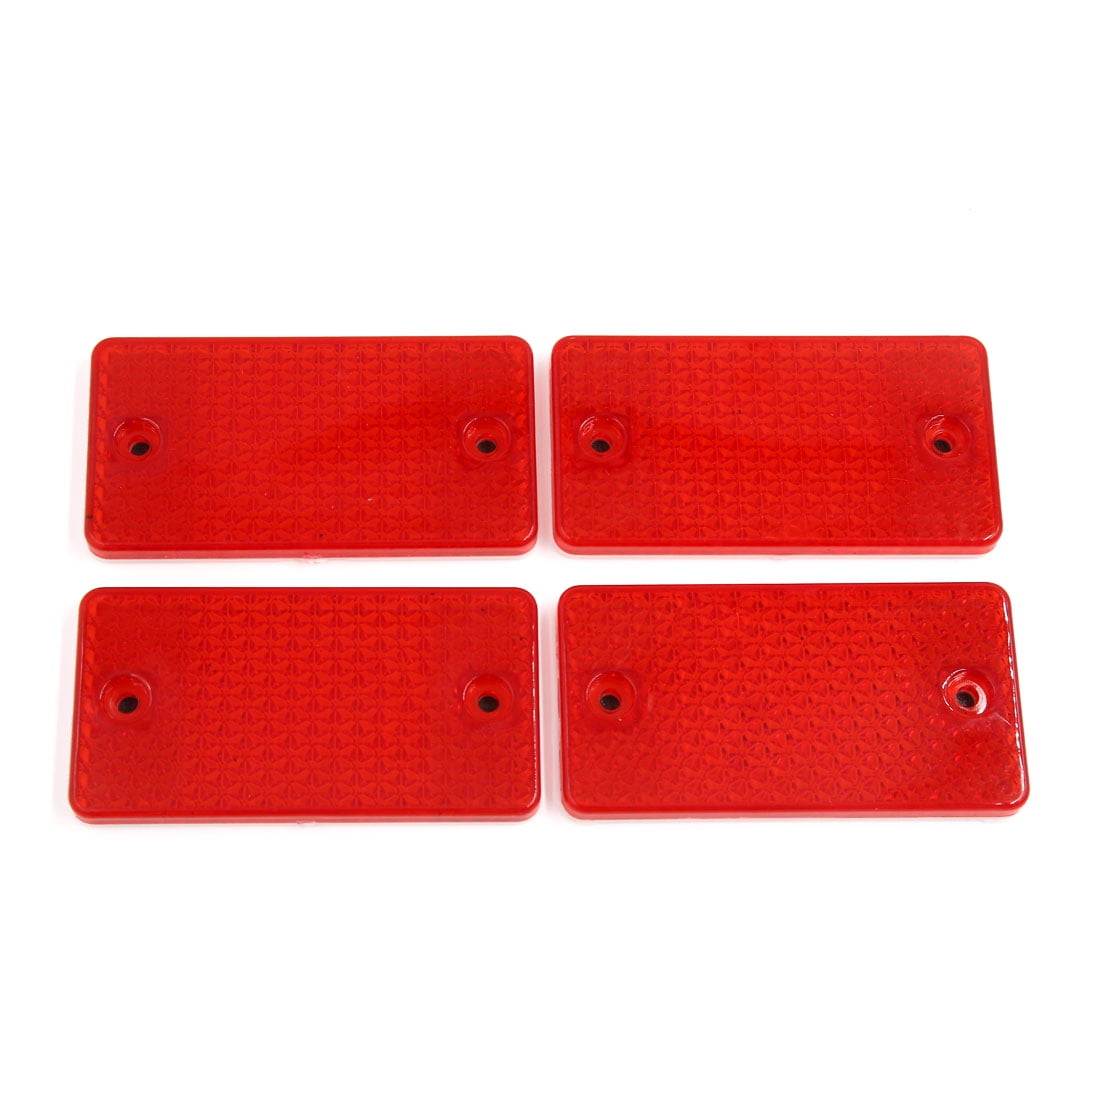 sourcingmap Universal Truck Car Red Plastic Adhesiive Reflective Plate w/o Holes 2PCS